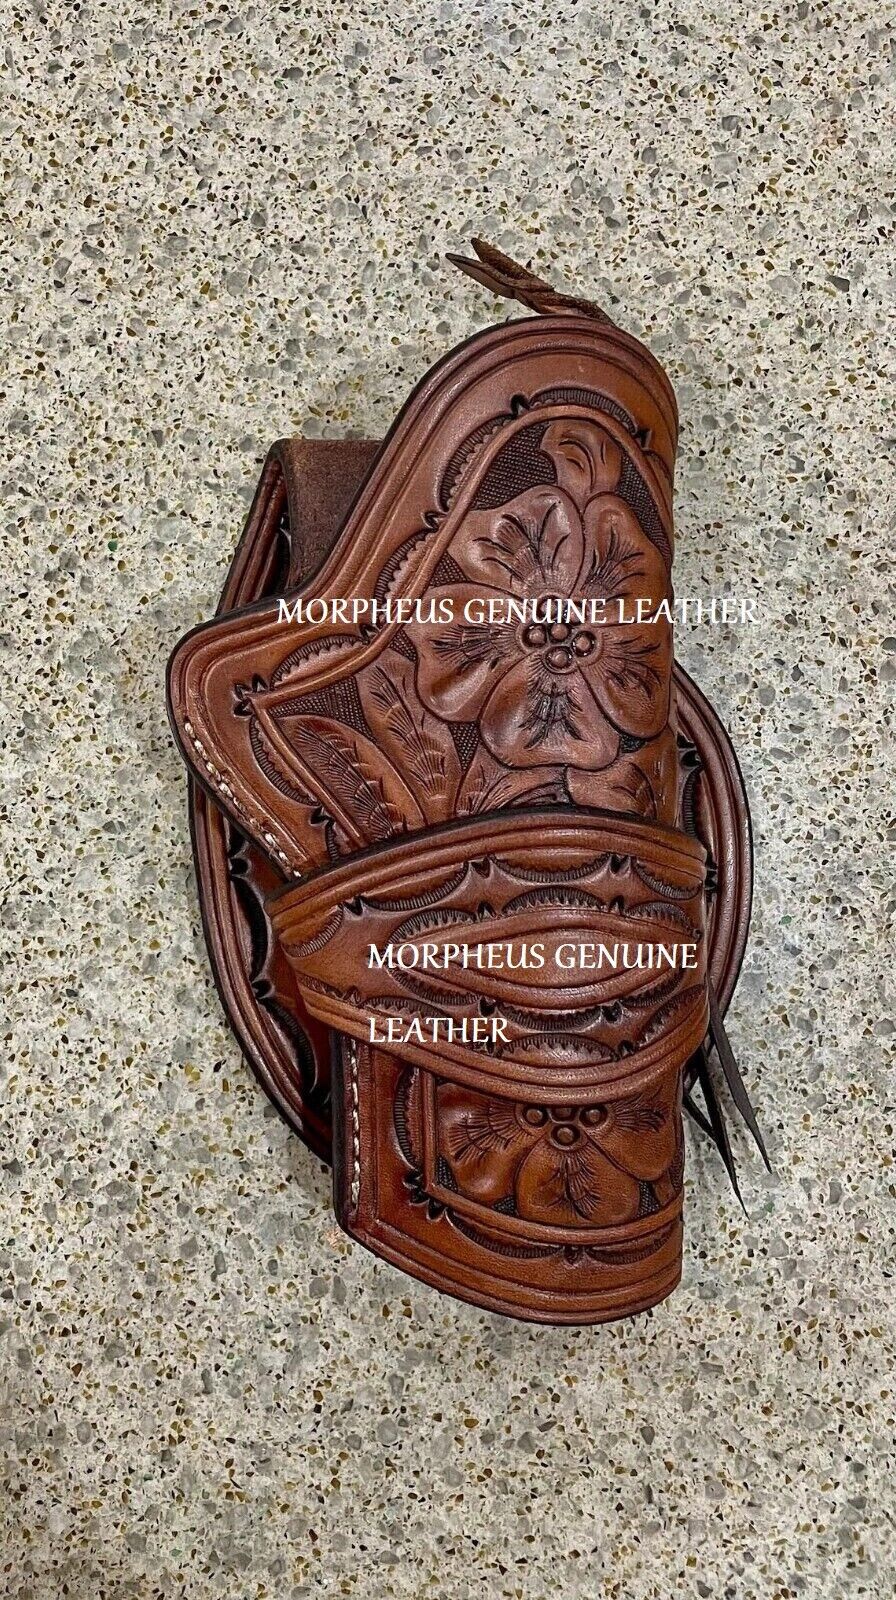 CROSS DRAW HOLSTER FITS SINGLE ACTION RUGER COLT WESTERN LEATHER GUN HOLSTER